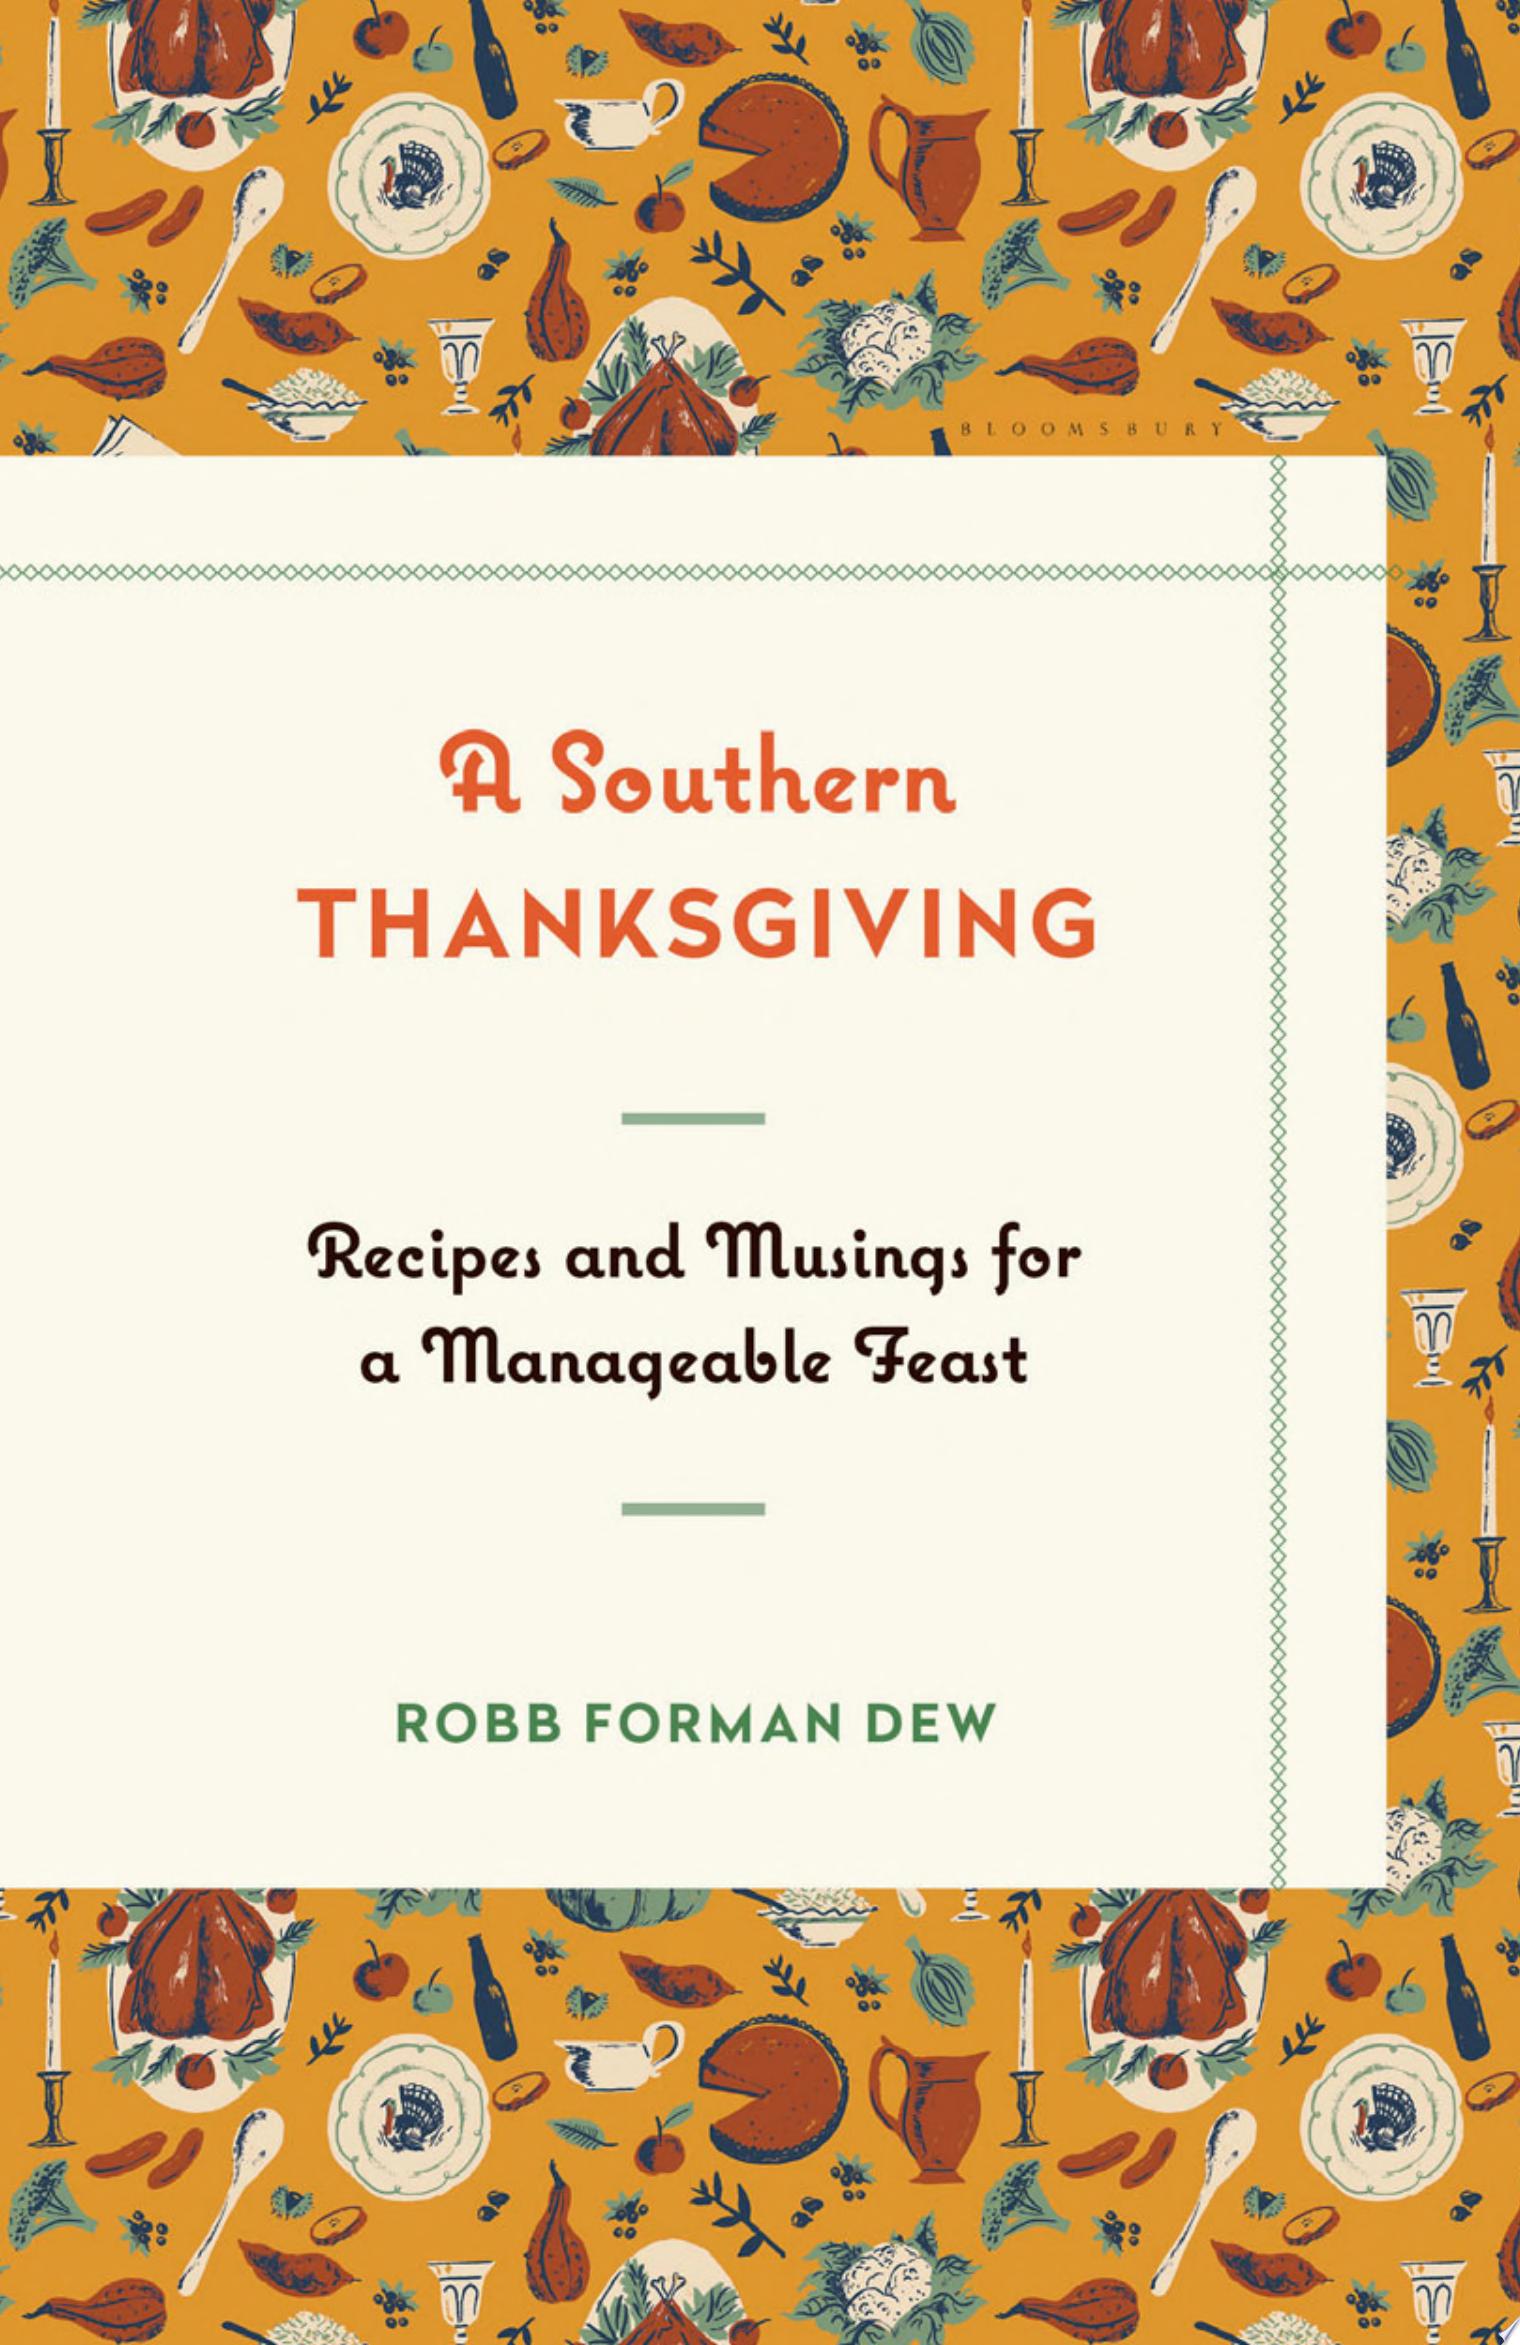 Image for "A Southern Thanksgiving"